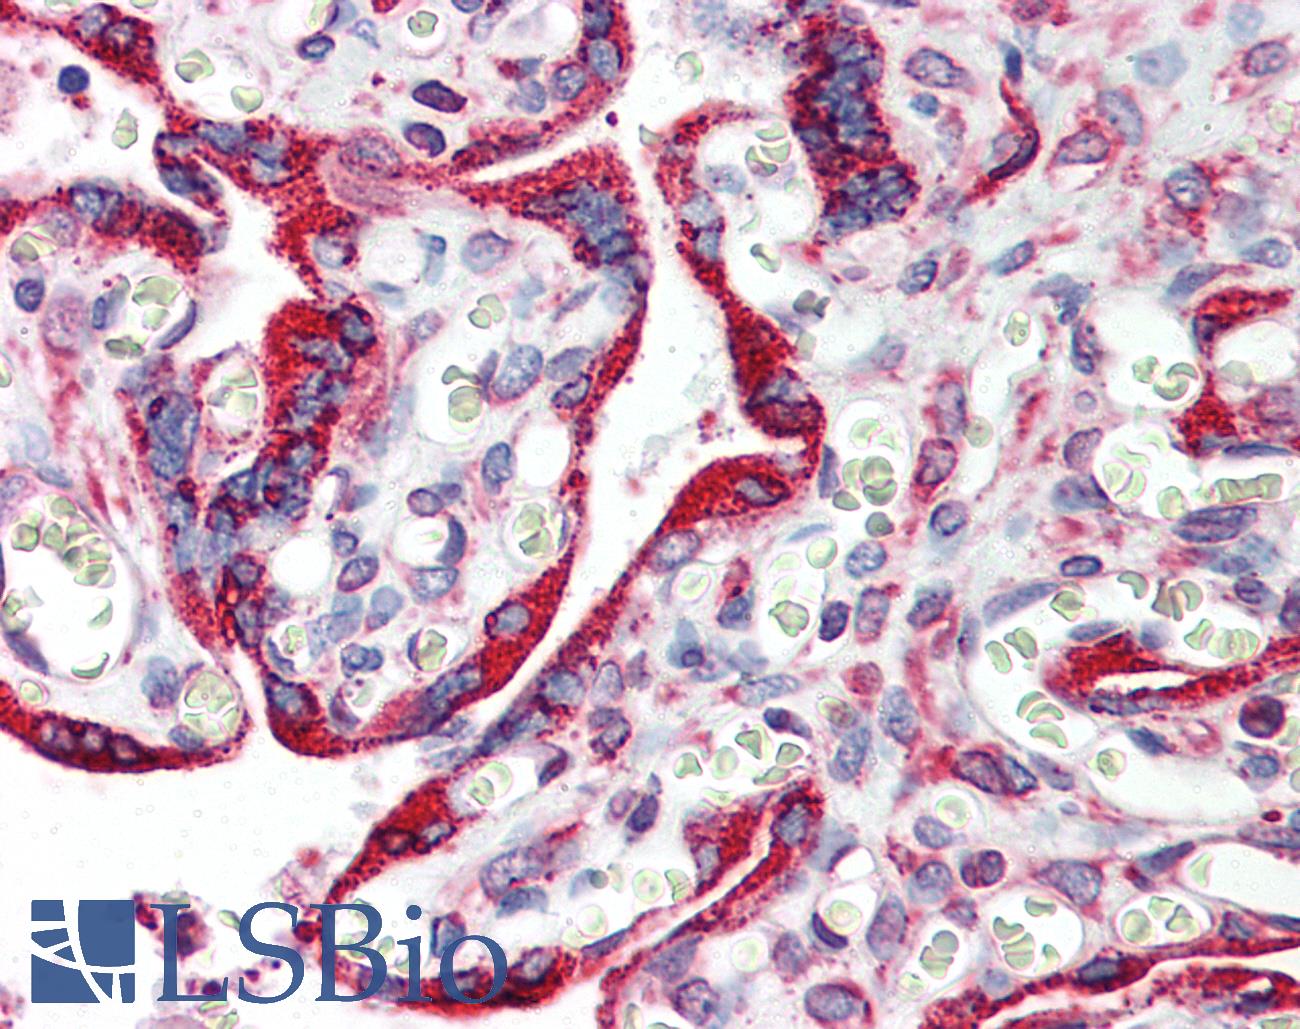 CANX / Calnexin Antibody - Anti-Calnexin antibody IHC of human placenta. Immunohistochemistry of formalin-fixed, paraffin-embedded tissue after heat-induced antigen retrieval. Antibody concentration 5 ug/ml.